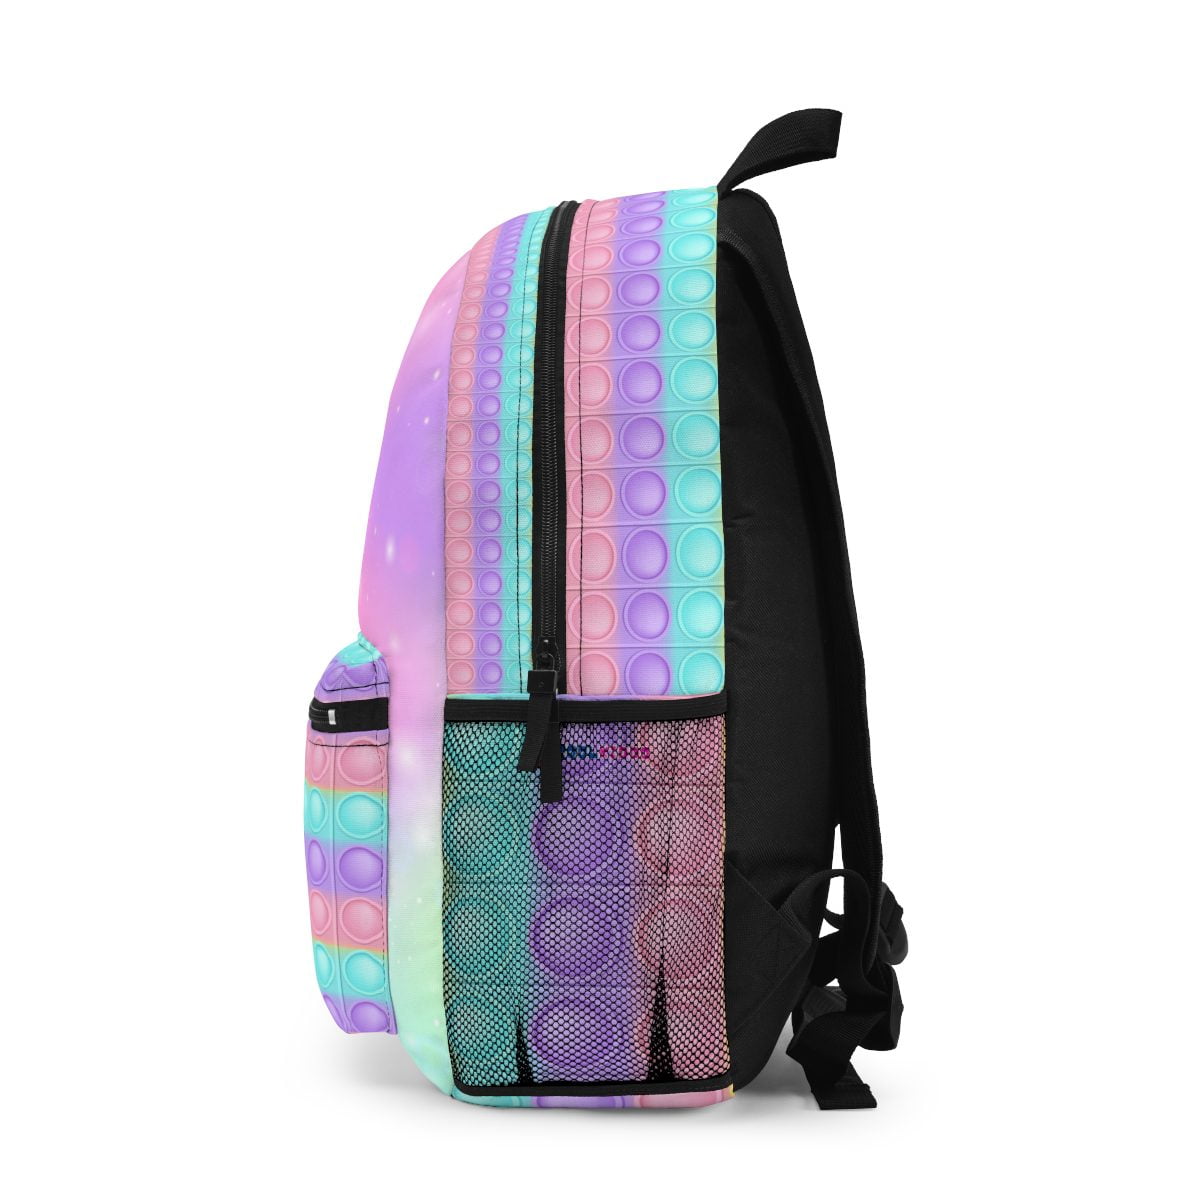 POP IT Simulation style and Bubble Gum Galaxy Backpack Cool Kiddo 14